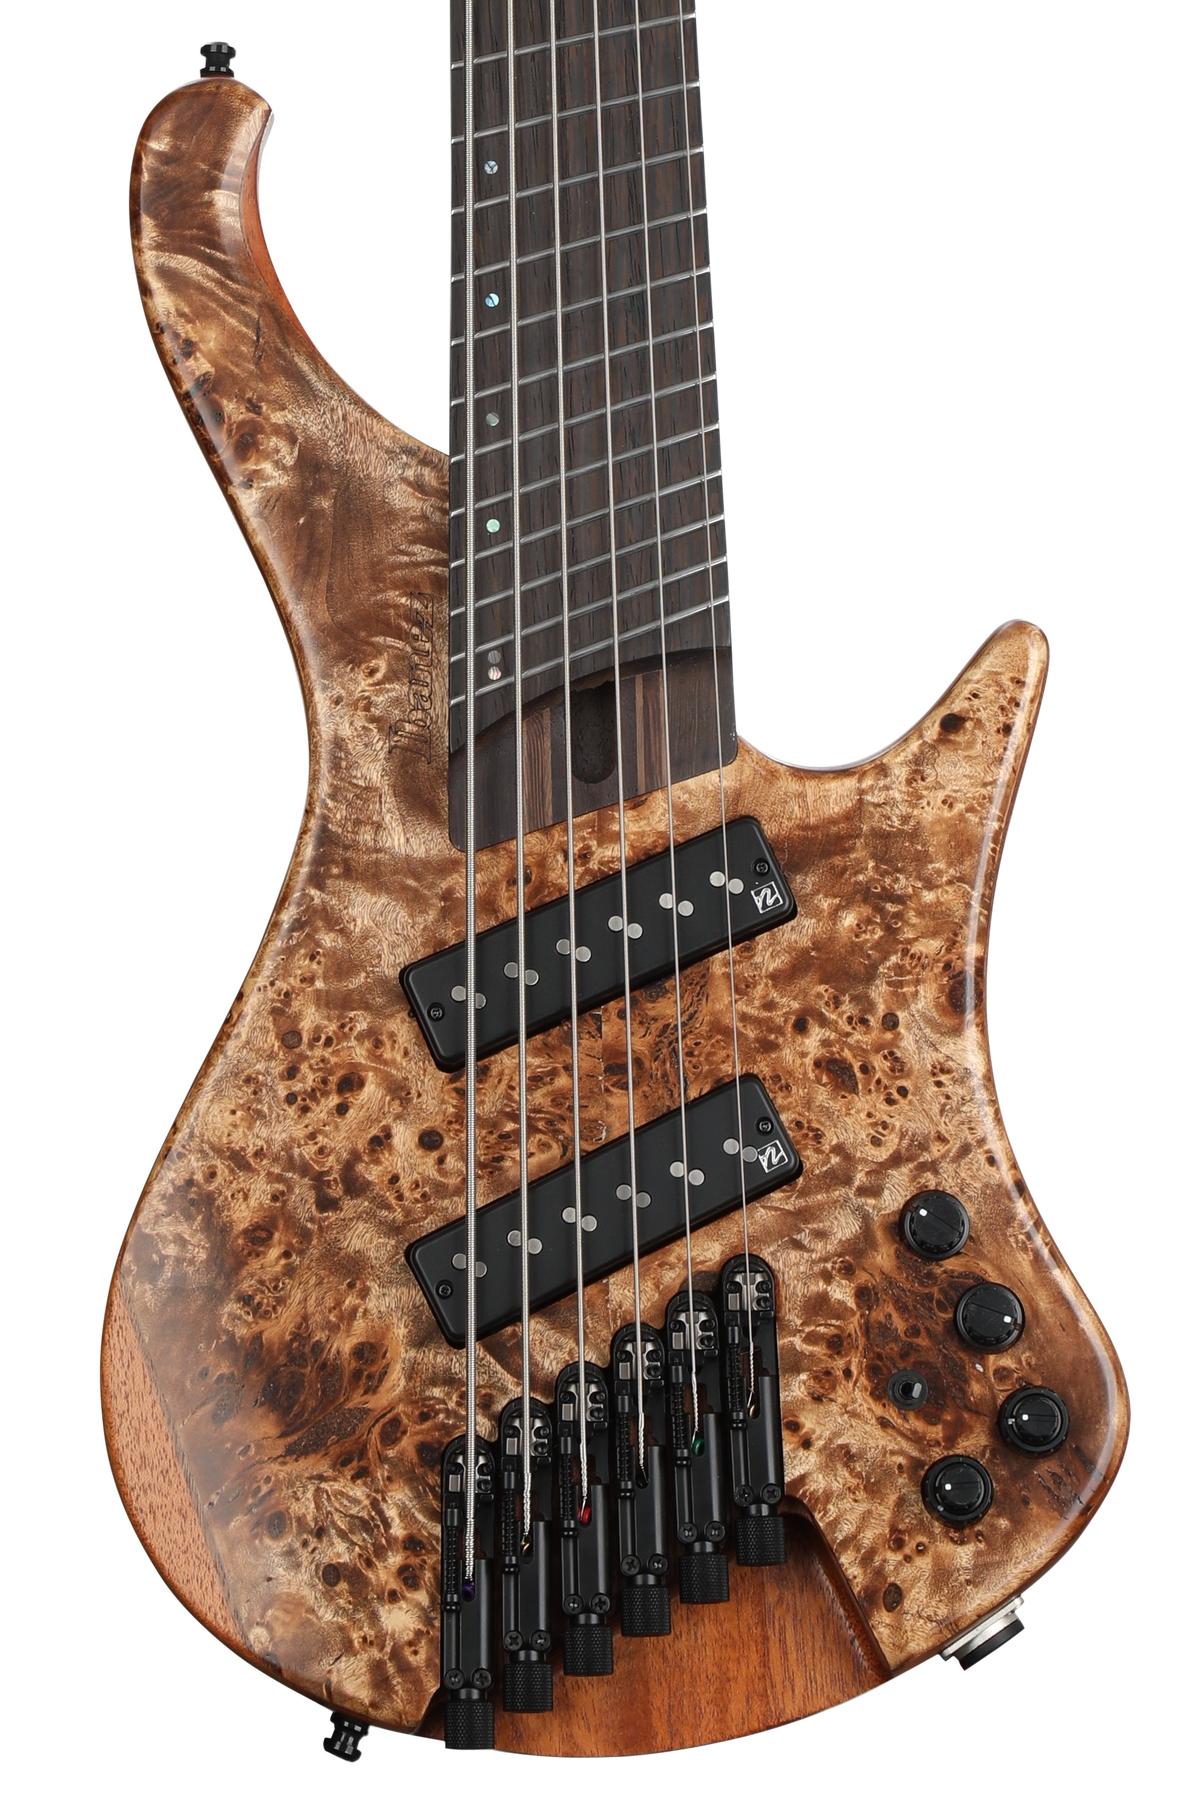 6+ string Bass Guitars - Sweetwater